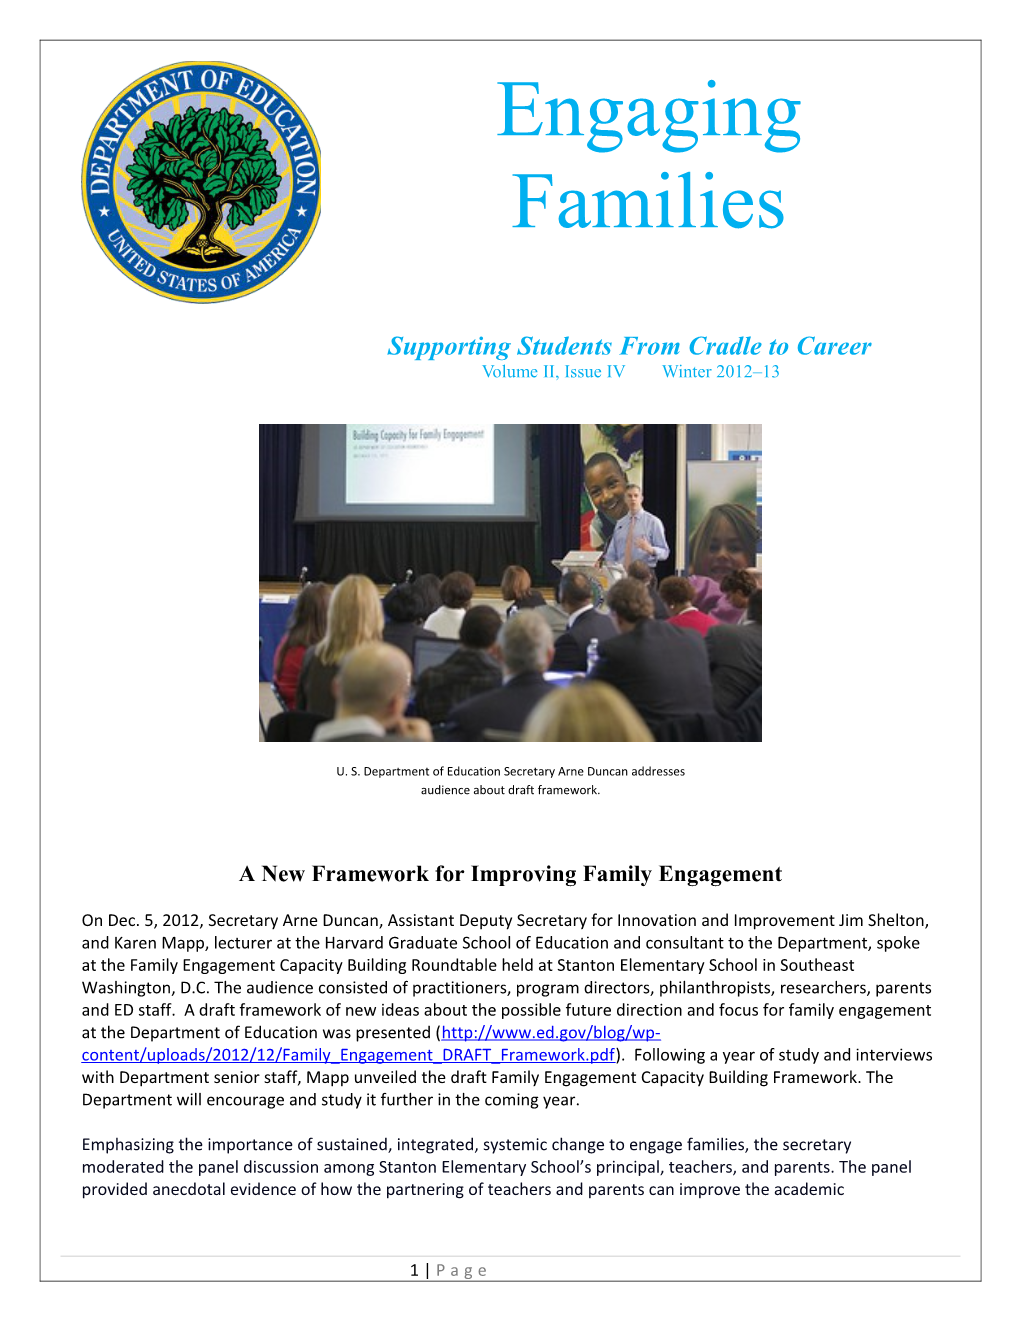 Engaging Families Newsletter: Volume II, Issue IV Winter 2012 13 February 2013 (MS Word)